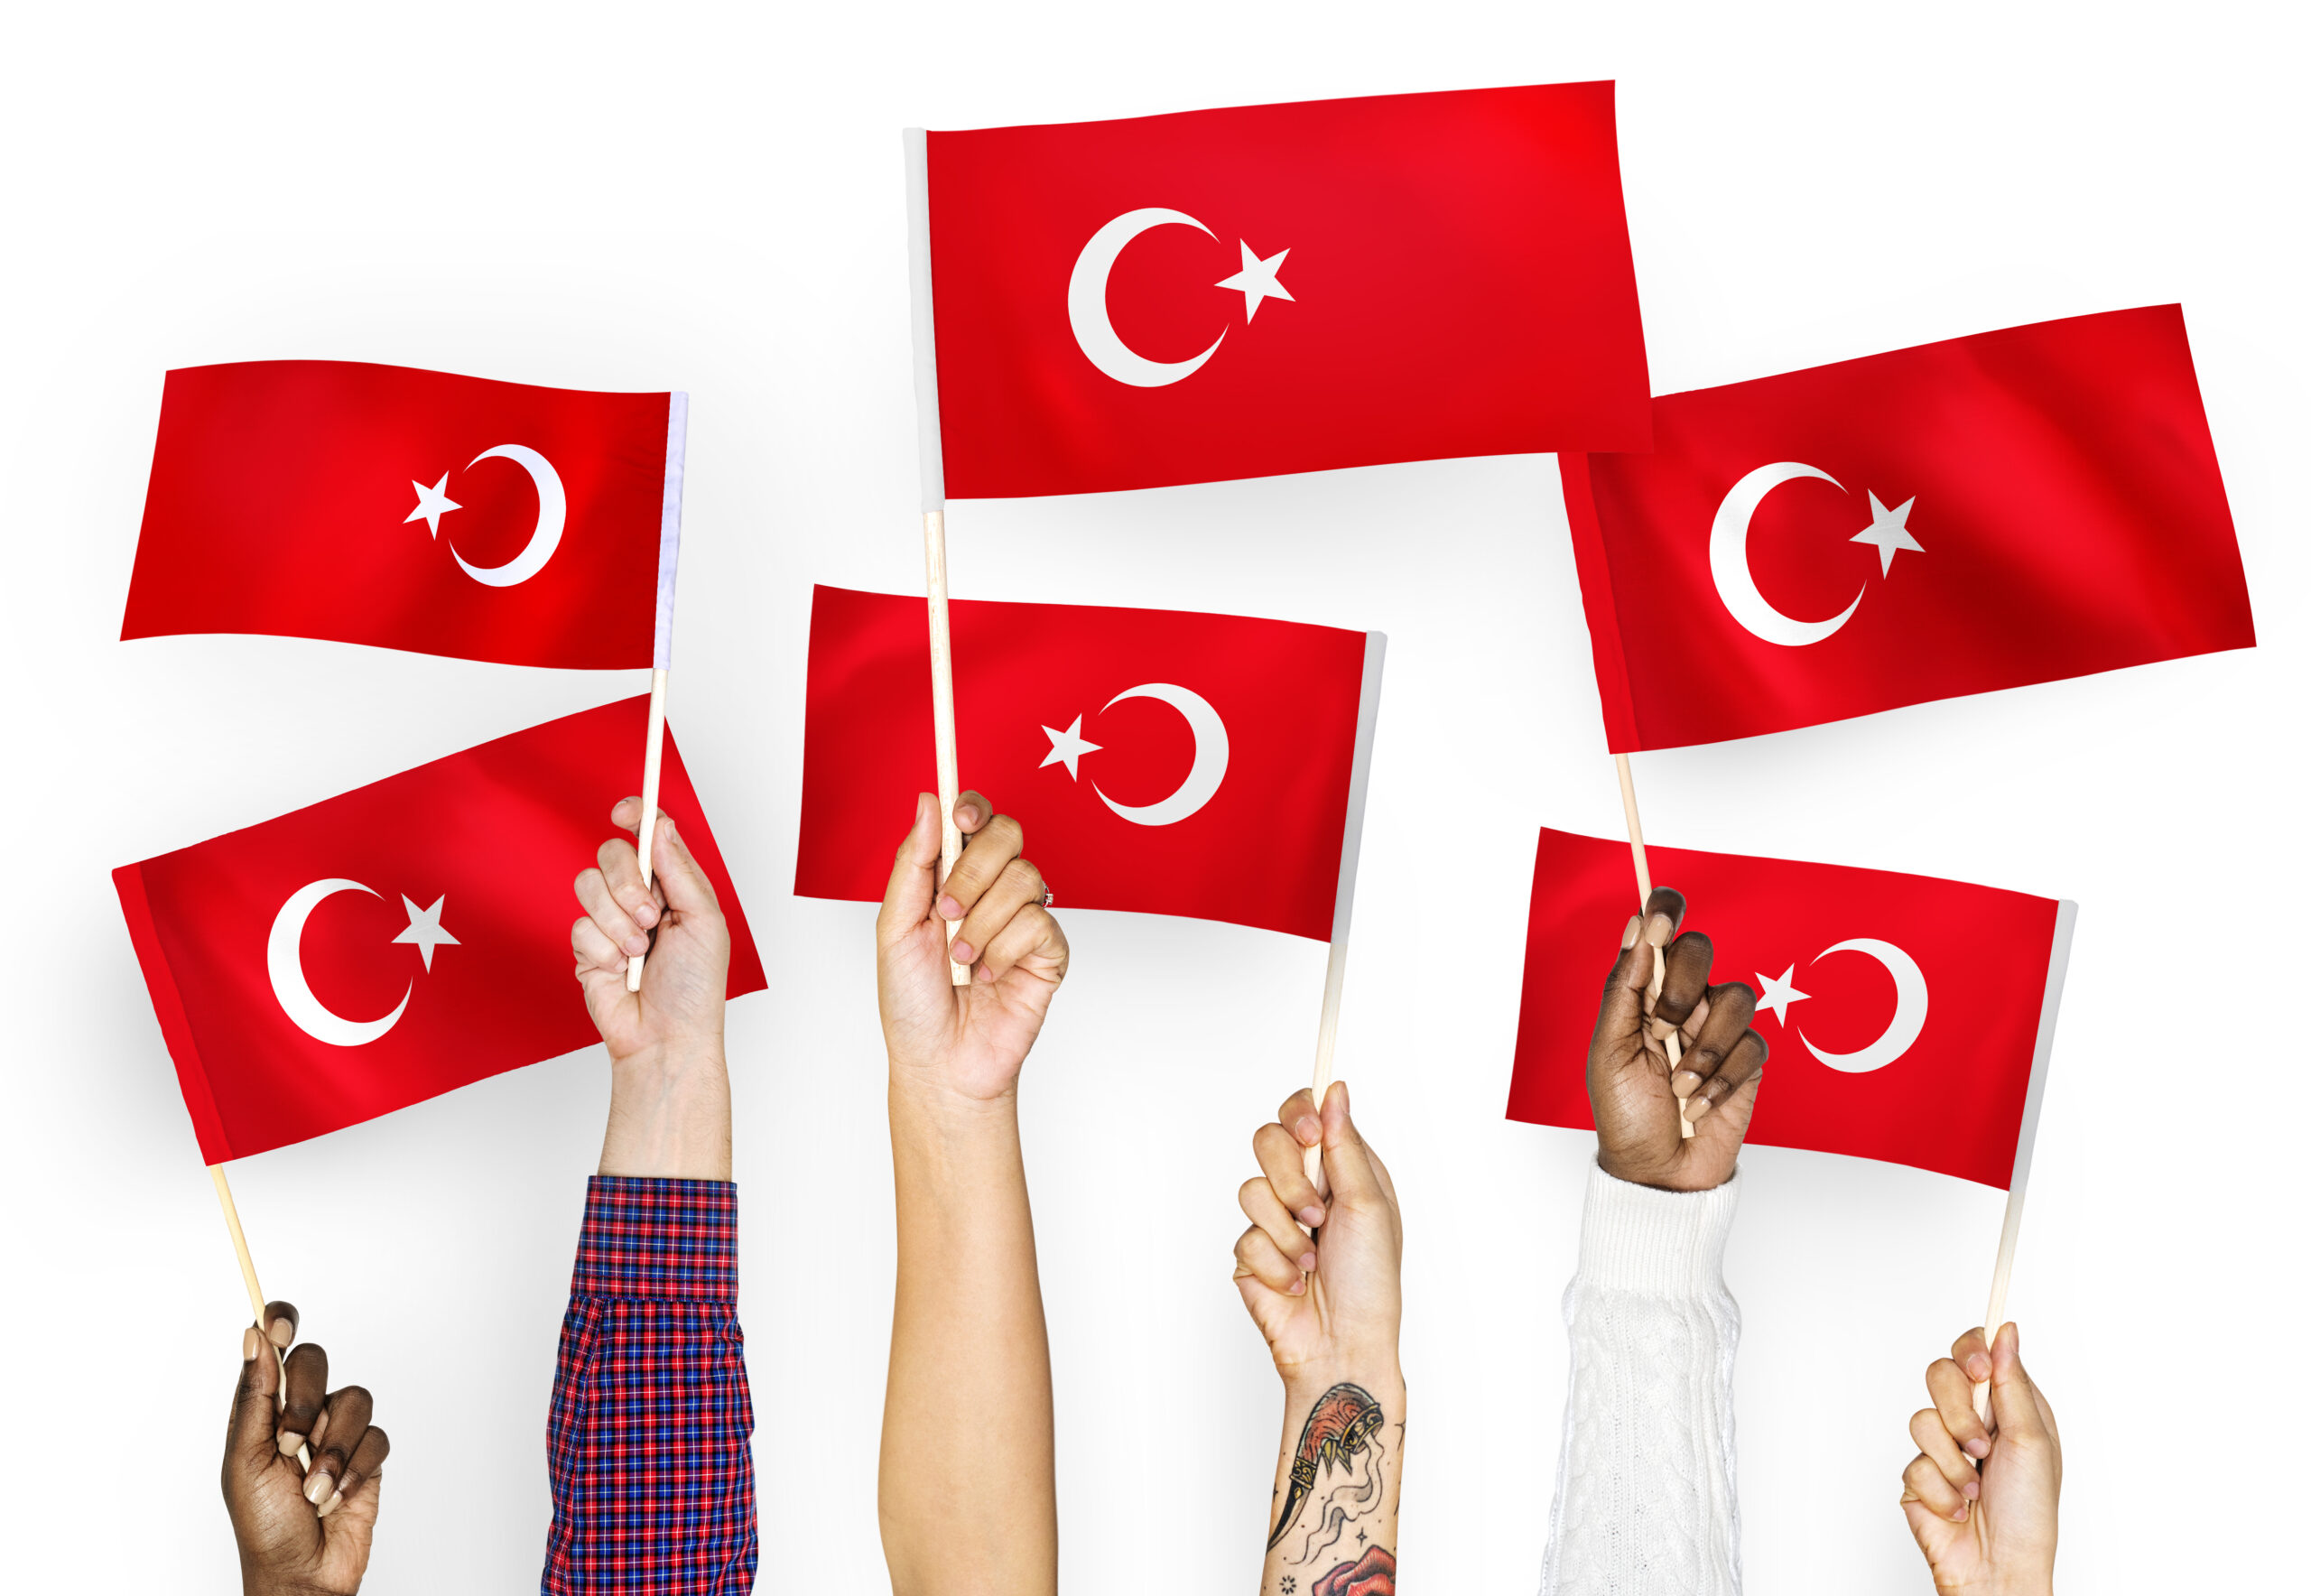 7 Reasons Why You Should Choose Turkey To Study